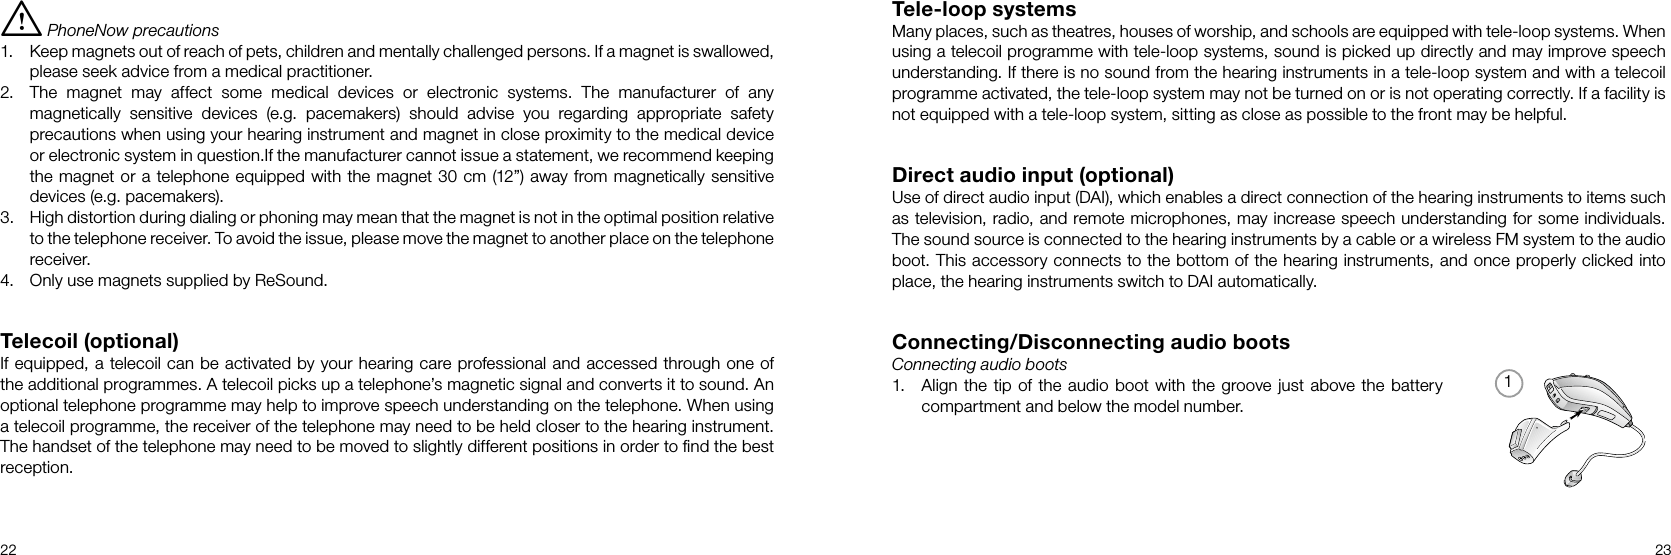 122 23Tele-loop systemsMany places, such as theatres, houses of worship, and schools are equipped with tele-loop systems. When using a telecoil programme with tele-loop systems, sound is picked up directly and may improve speech understanding. If there is no sound from the hearing instruments in a tele-loop system and with a telecoil programme activated, the tele-loop system may not be turned on or is not operating correctly. If a facility is not equipped with a tele-loop system, sitting as close as possible to the front may be helpful.Direct audio input (optional)Use of direct audio input (DAI), which enables a direct connection of the hearing instruments to items such as television, radio, and remote microphones, may increase speech understanding for some individuals. The sound source is connected to the hearing instruments by a cable or a wireless FM system to the audio boot. This accessory connects to the bottom of the hearing instruments, and once properly clicked into place, the hearing instruments switch to DAI automatically.Connecting/Disconnecting audio bootsConnecting audio boots1.  Align the tip of the audio boot with the groove just above the battery compartment and below the model number.i PhoneNow precautions1.  Keep magnets out of reach of pets, children and mentally challenged persons. If a magnet is swallowed, please seek advice from a medical practitioner.2.  The magnet may affect some medical devices or electronic systems. The manufacturer of any magnetically sensitive devices (e.g. pacemakers) should advise you regarding appropriate safety precautions when using your hearing instrument and magnet in close proximity to the medical device or electronic system in question.If the manufacturer cannot issue a statement, we recommend keeping the magnet or a telephone equipped with the magnet 30 cm (12”) away from magnetically sensitive devices (e.g. pacemakers).3.  High distortion during dialing or phoning may mean that the magnet is not in the optimal position relative to the telephone receiver. To avoid the issue, please move the magnet to another place on the telephone receiver.4.  Only use magnets supplied by ReSound.Telecoil (optional)If equipped, a telecoil can be activated by your hearing care professional and accessed through one of the additional programmes. A telecoil picks up a telephone’s magnetic signal and converts it to sound. An optional telephone programme may help to improve speech understanding on the telephone. When using a telecoil programme, the receiver of the telephone may need to be held closer to the hearing instrument. The handset of the telephone may need to be moved to slightly different positions in order to ﬁnd the best reception.